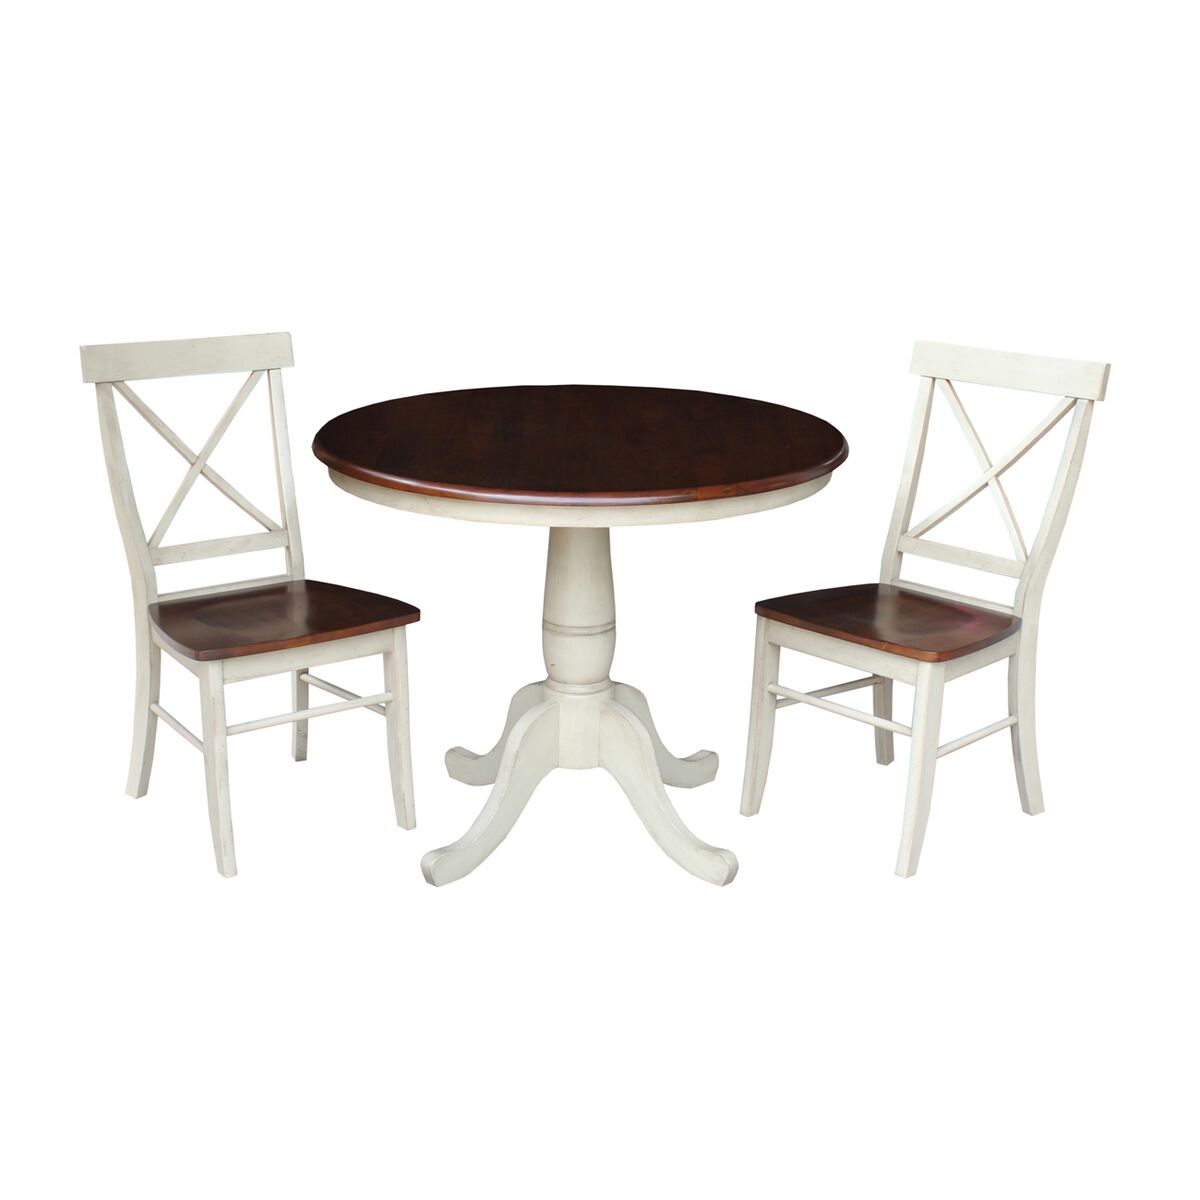 Picture of International Concepts K12-36RT-C613P 36 in. Round Top Pedestal Table With 2 X-Back Chairs - 3 Piece Set - Almond